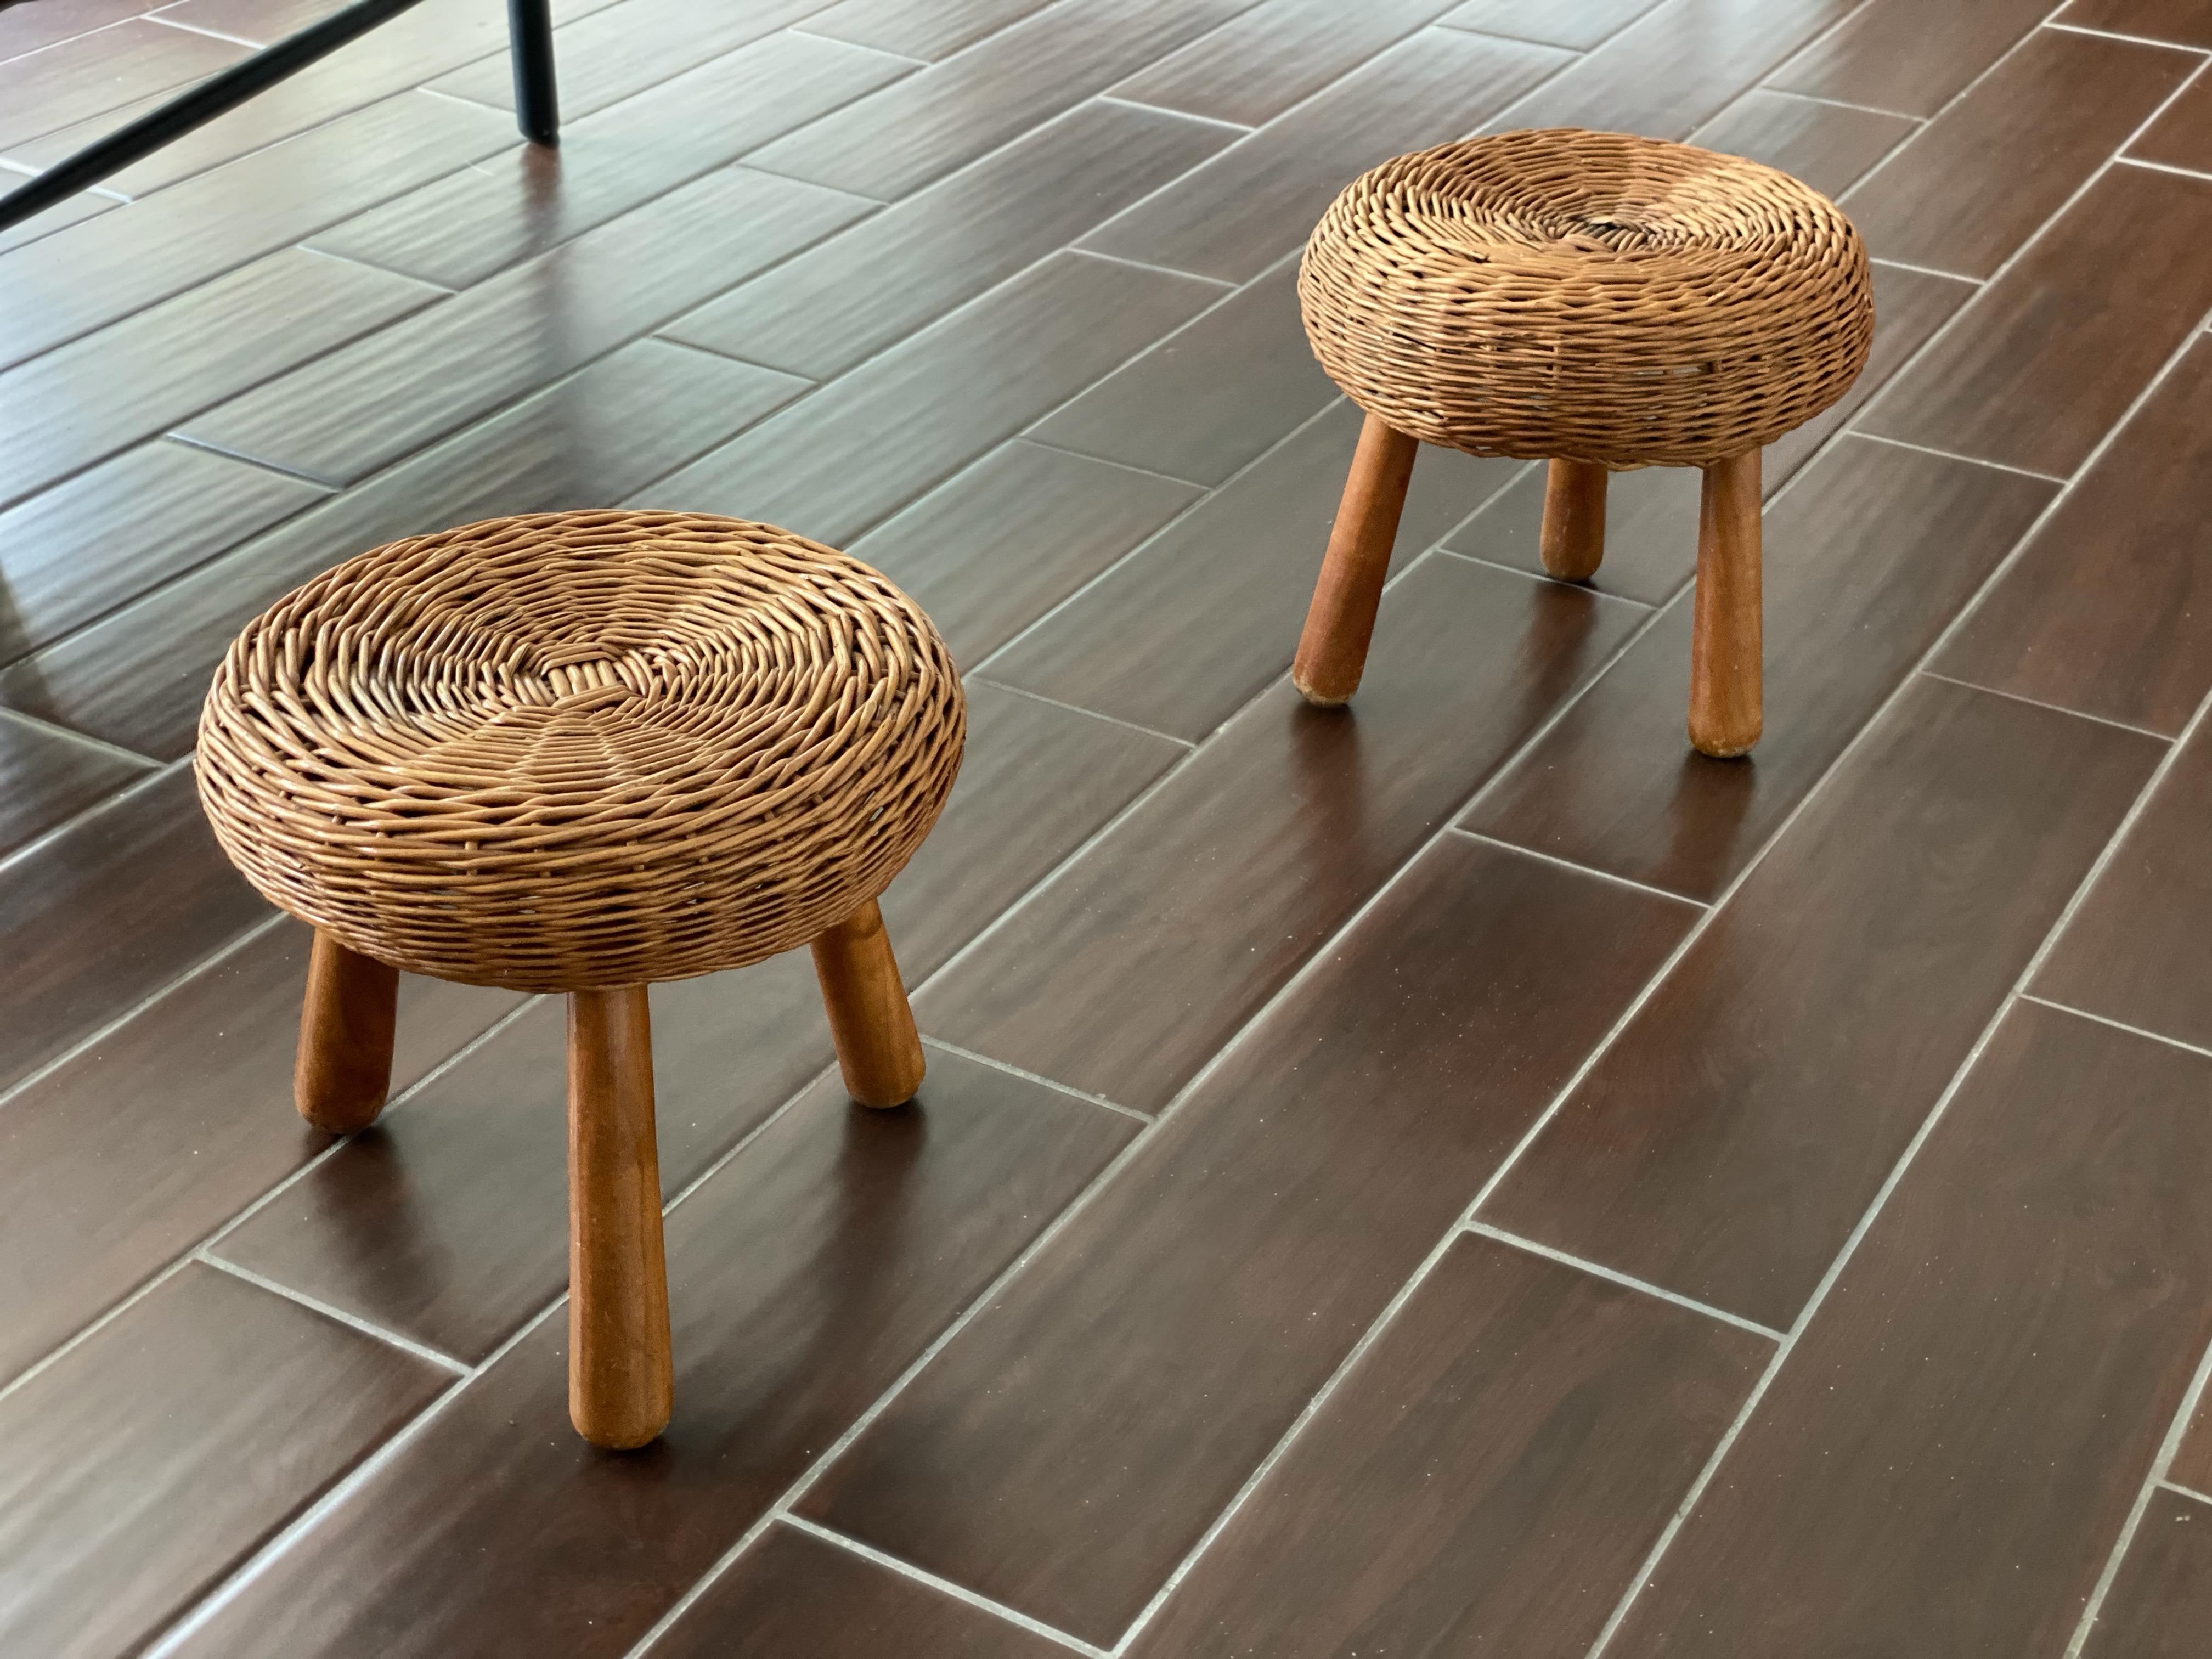 Pair of woven rattan/wicker stools or tables attributed to Tony Paul. Designed utilizing a mix of woven rattan while sitting on top of solid wood legs, give these stools wonderful proportions. Perfect accent pieces to complete a space. A few breaks